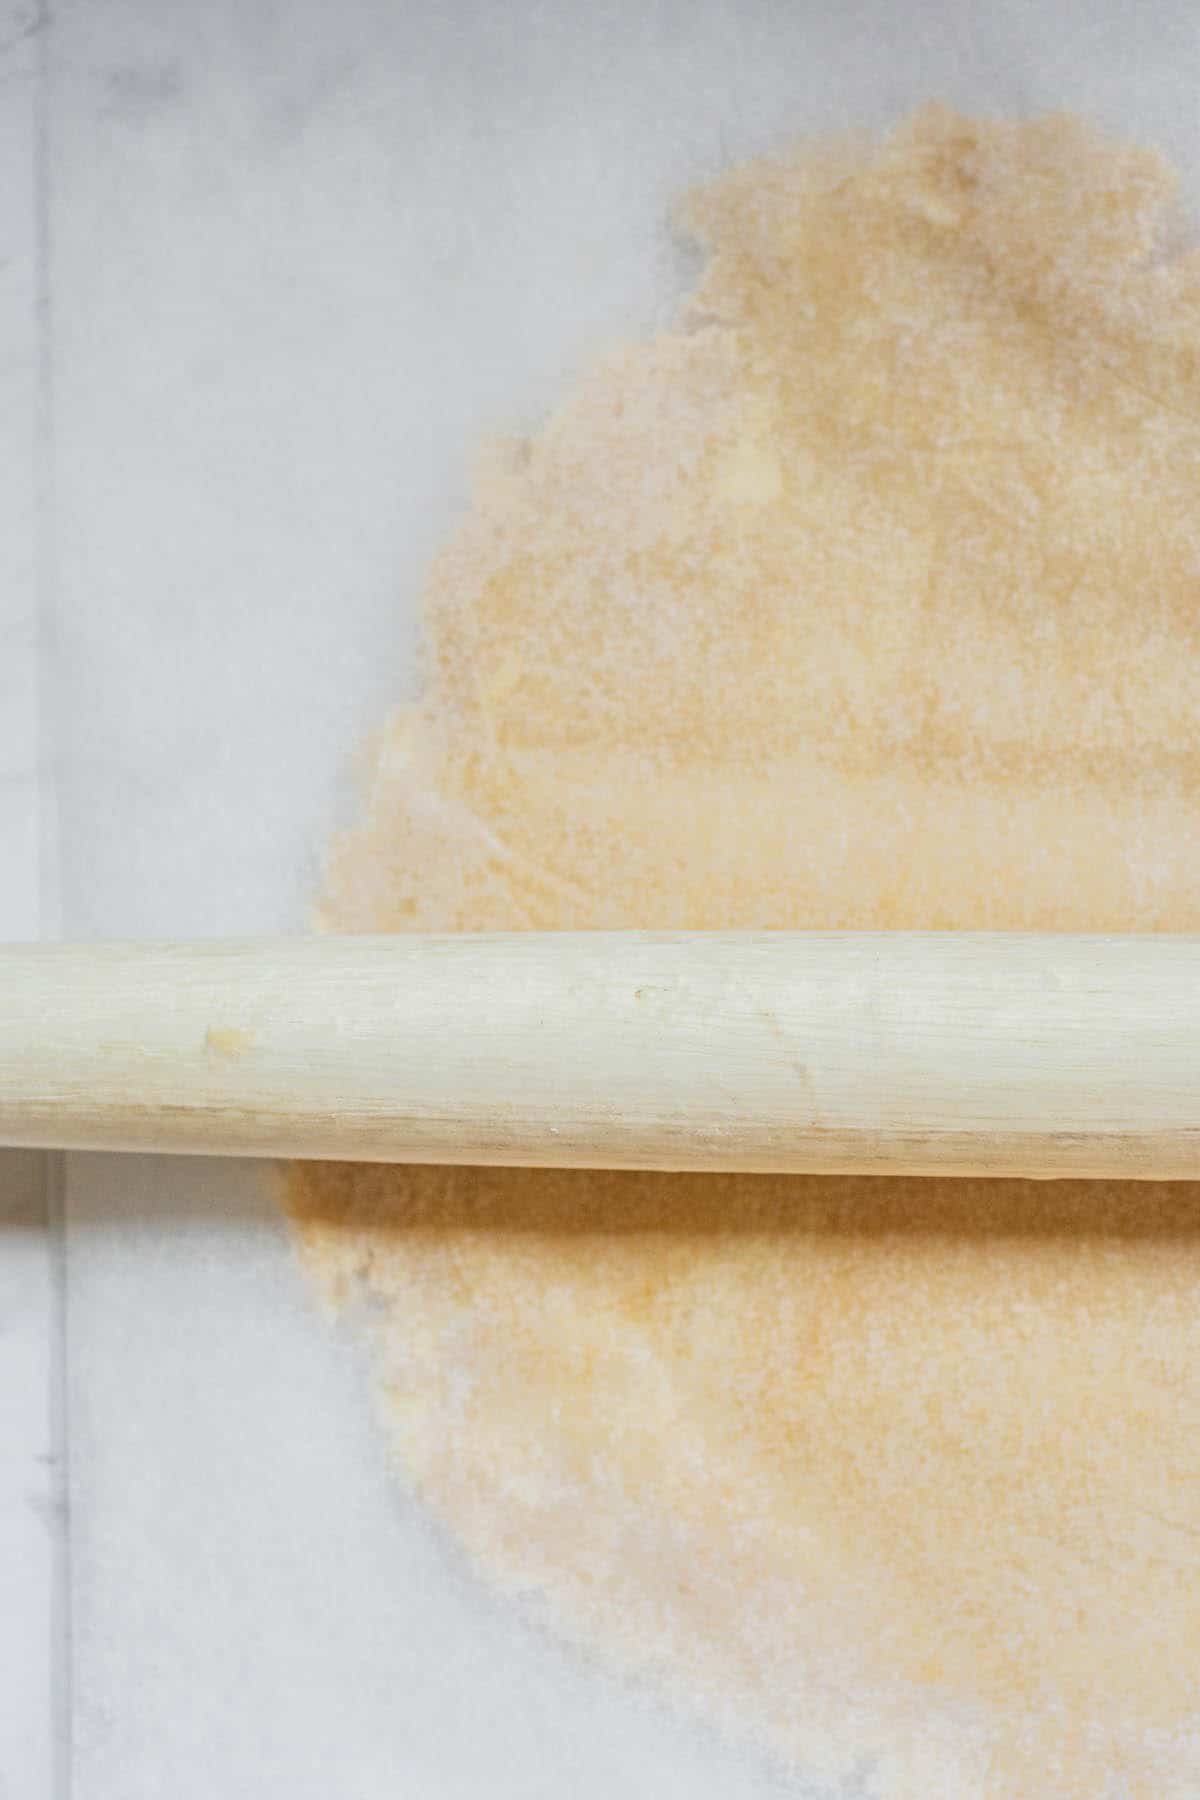 rolling dough between parchment.